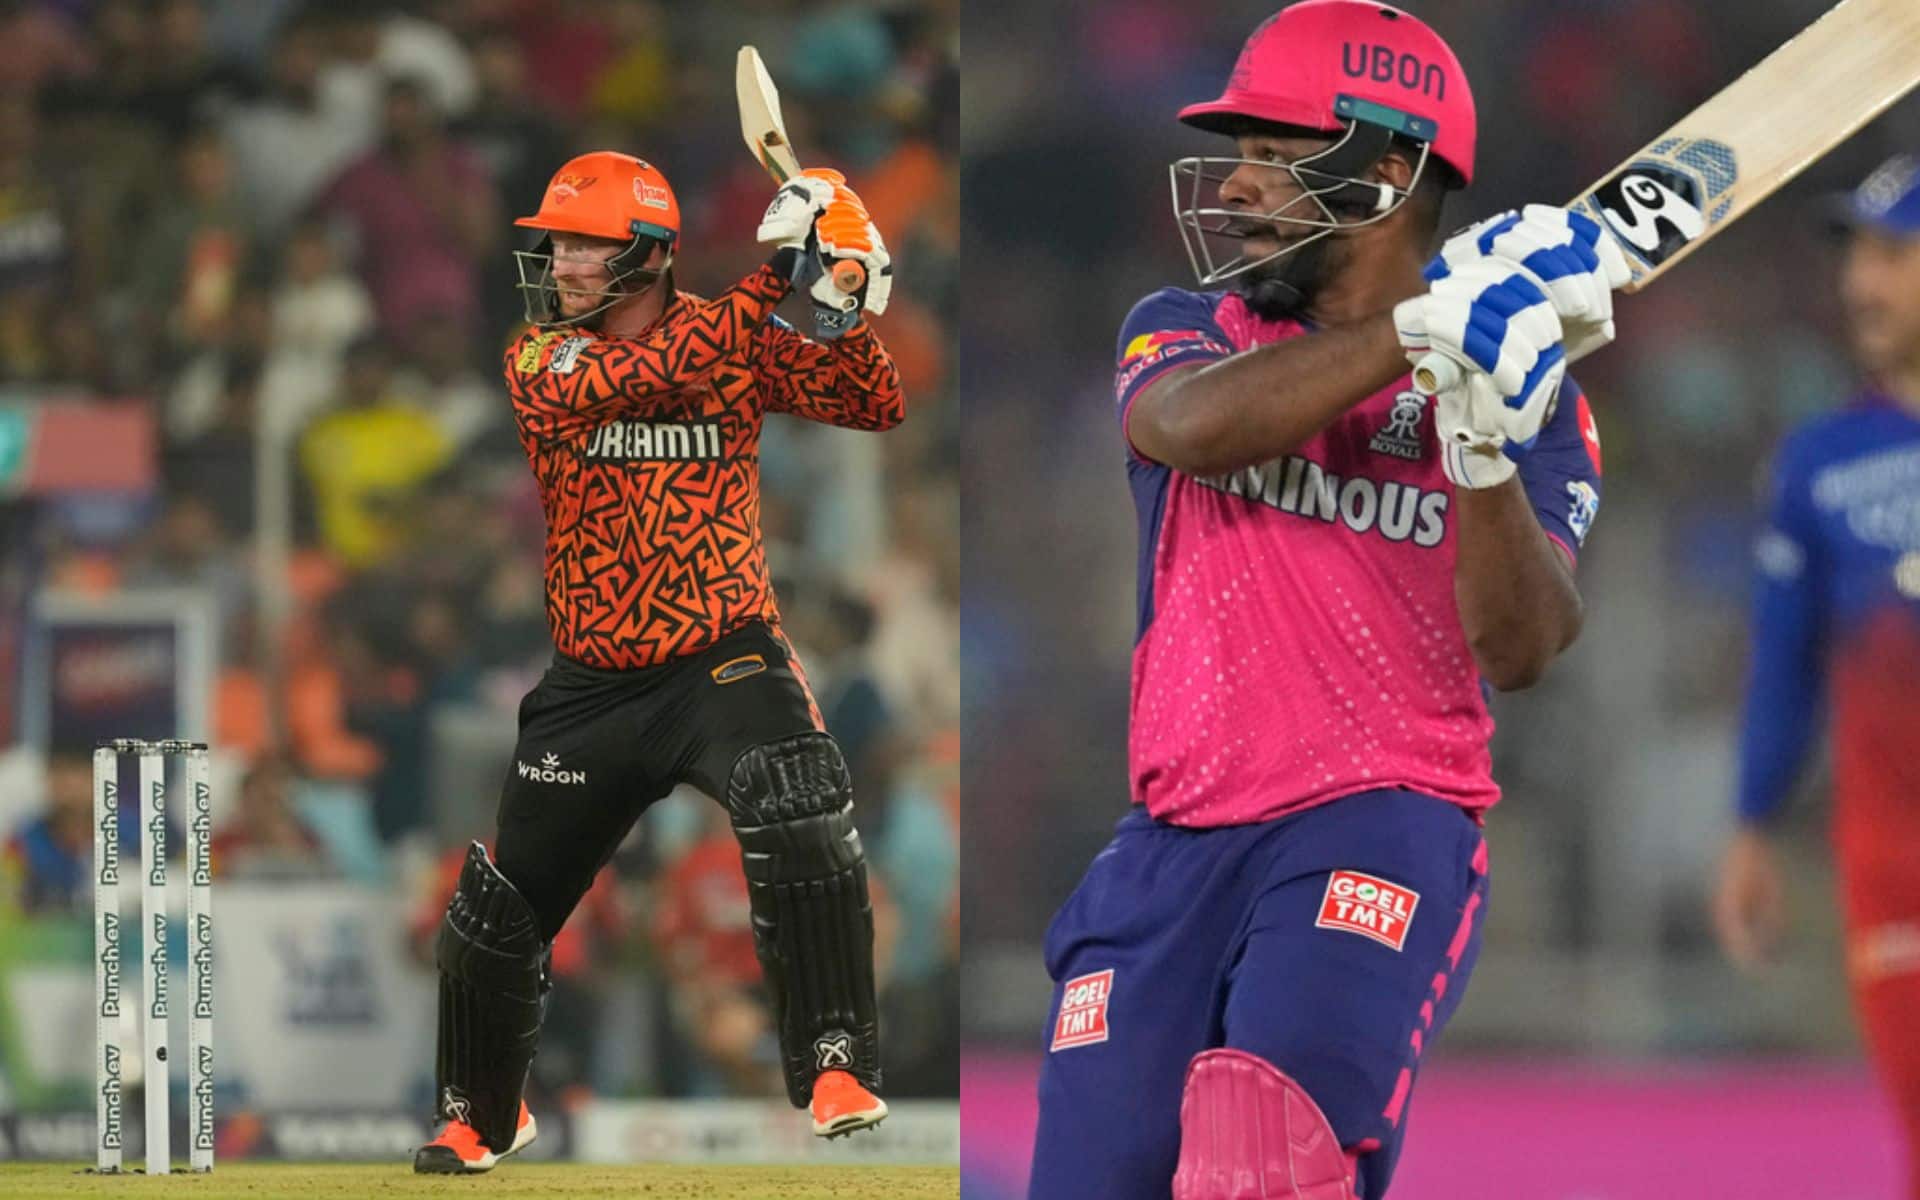 Heinrich Klaasen and Sanju Samson will be crucial for their team in the match [AP Photos]